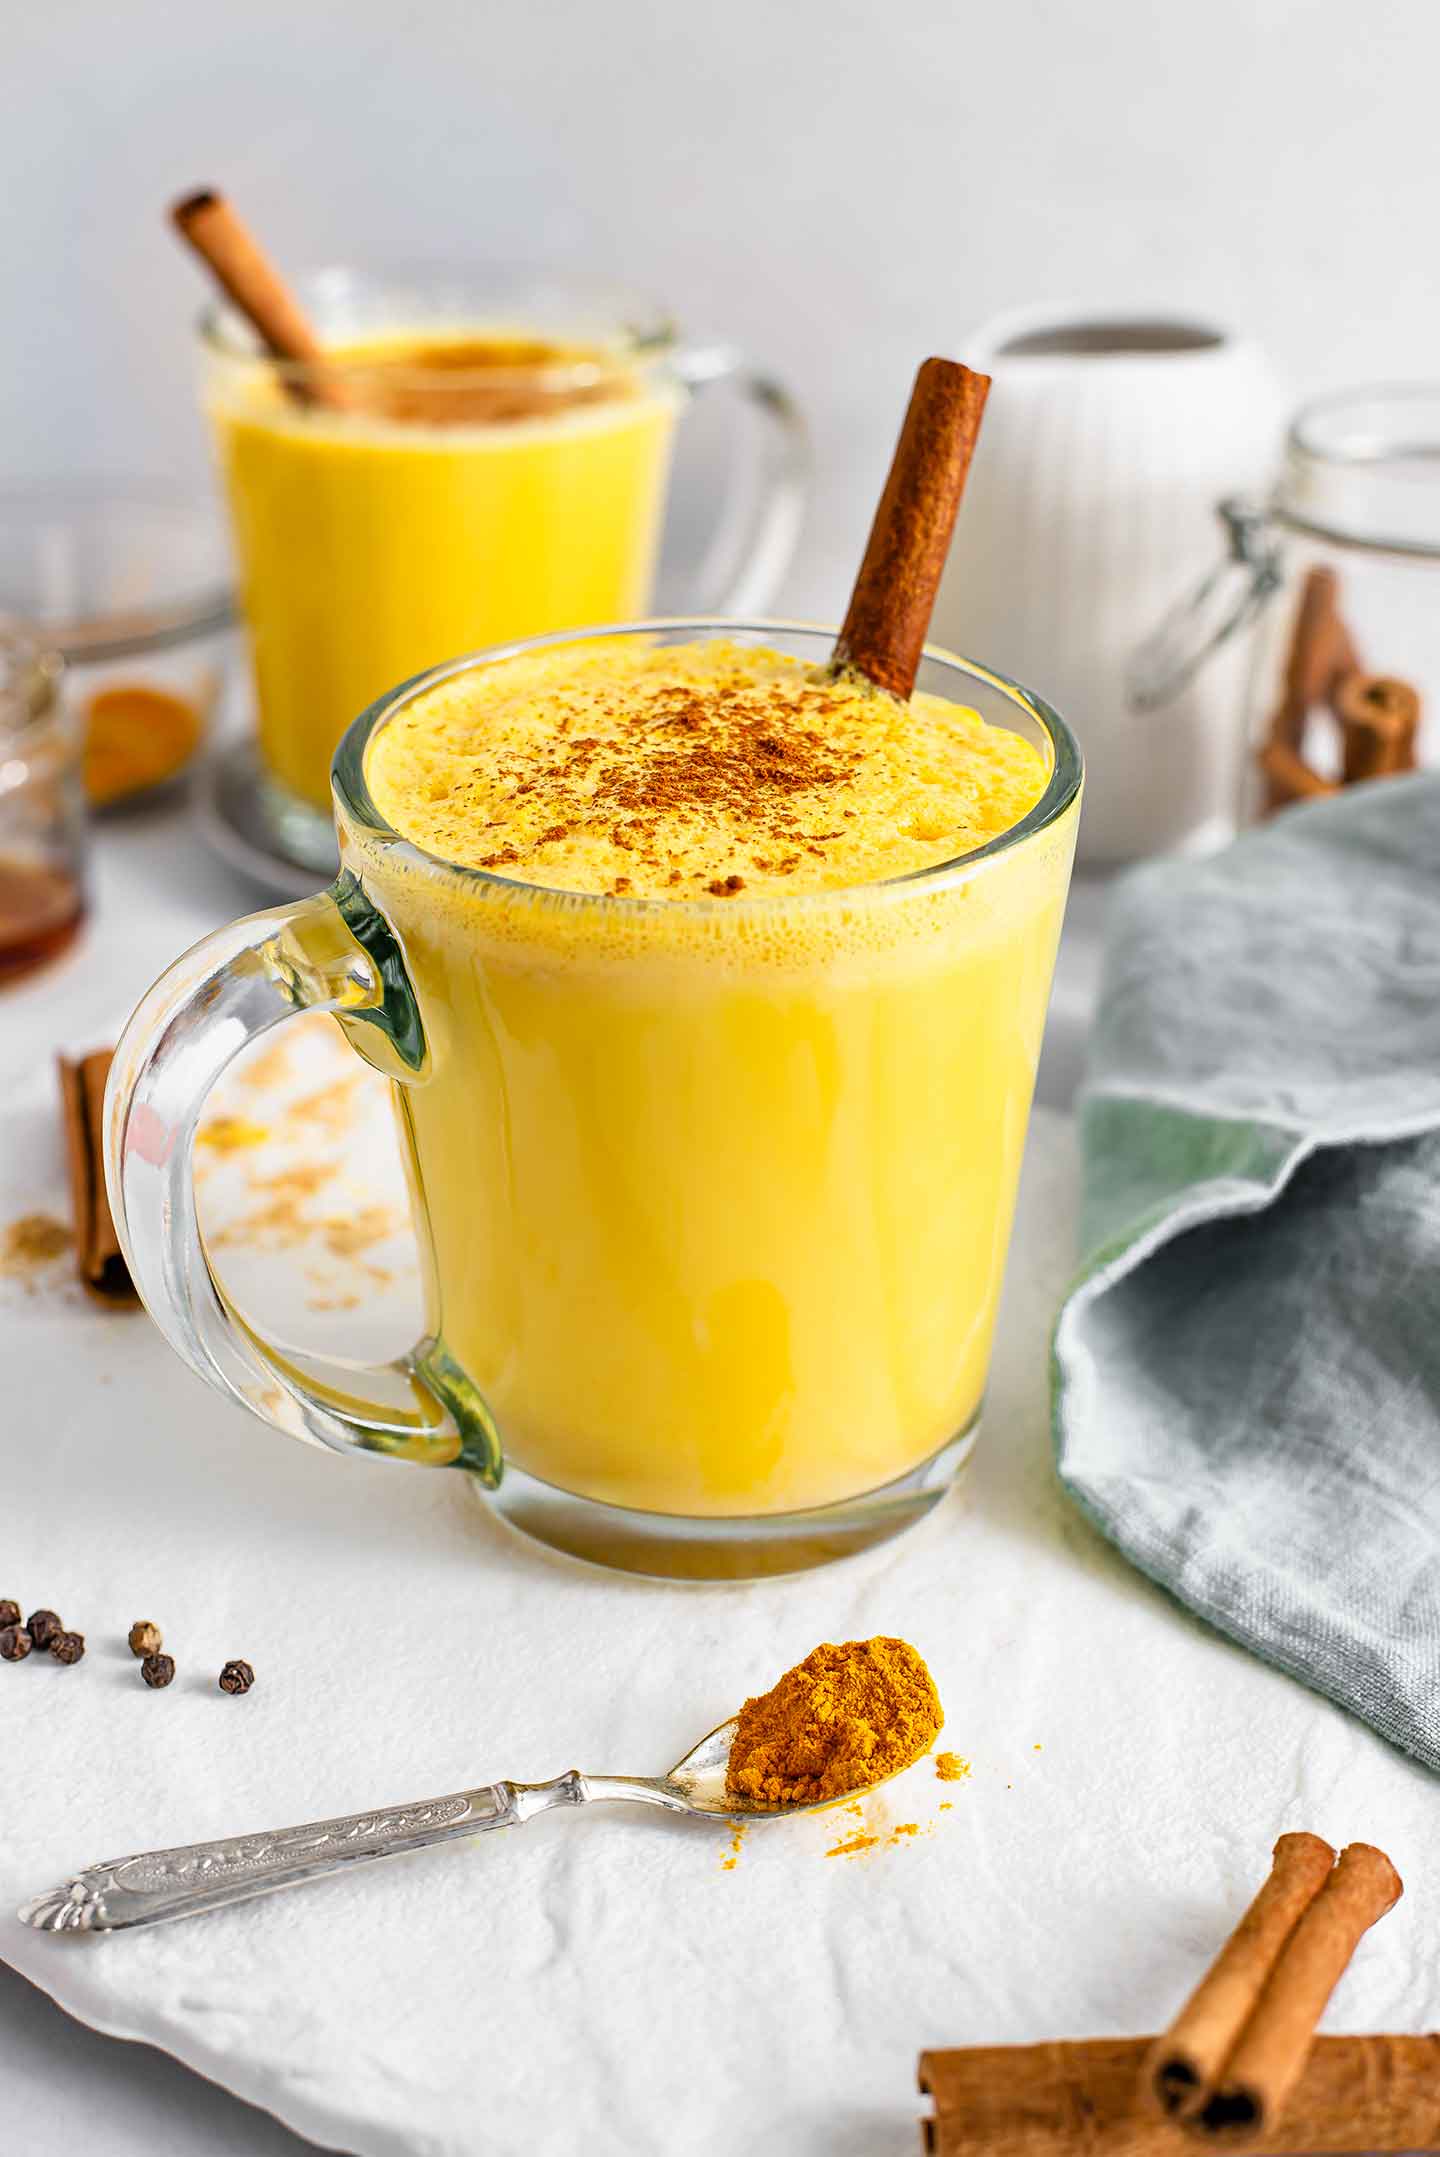 Golden turmeric milk fills a clear glass mug. A cinnamon stick protrudes from the foamy top and ground cinnamon is sprinkled on top. Another mug of milk, turmeric powder, and cinnamon sticks are in the background.